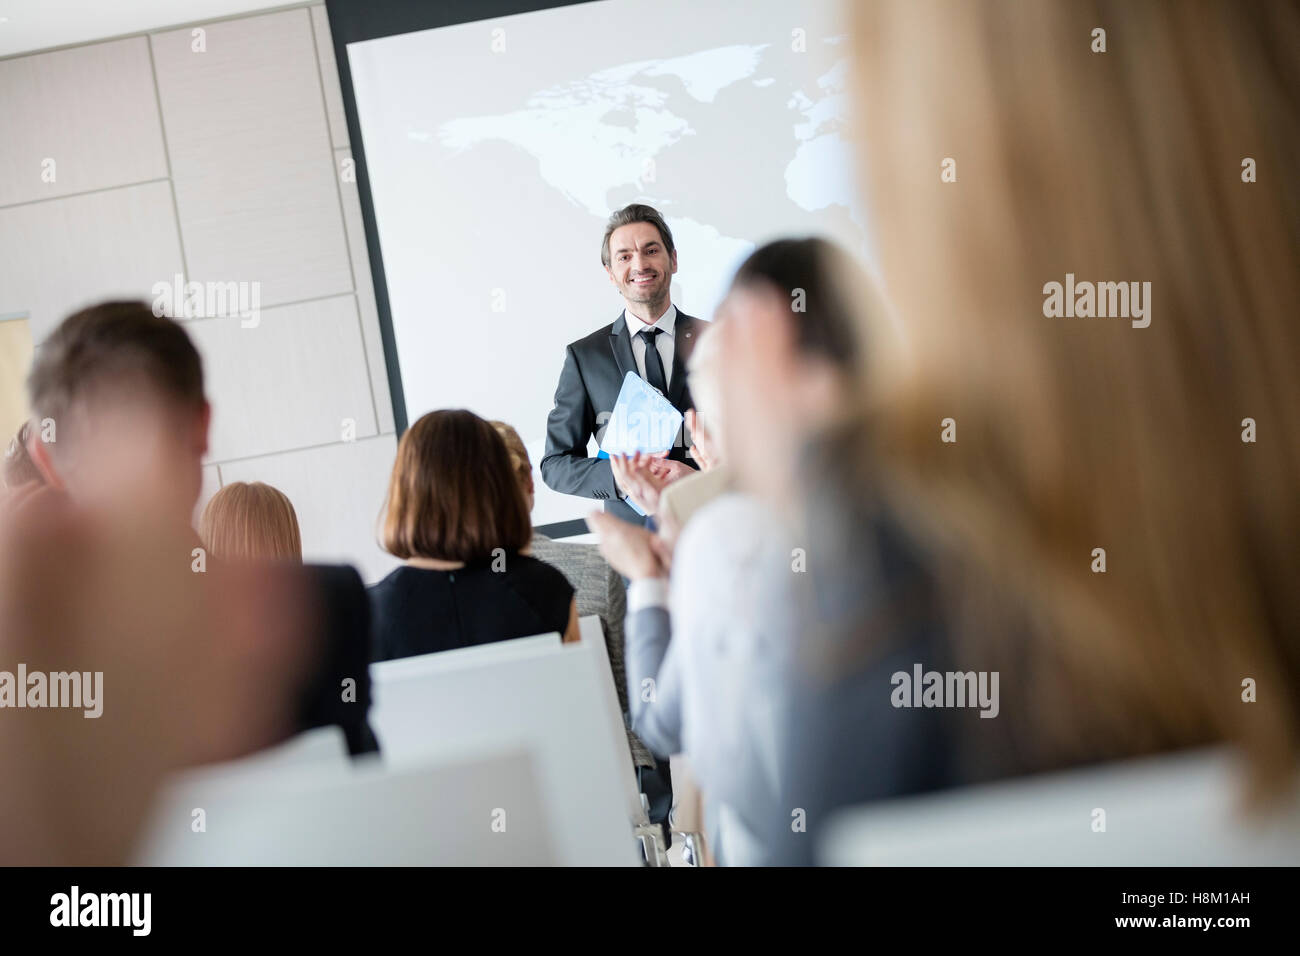 Confident public speaker looking at audience applauding during seminar Stock Photo